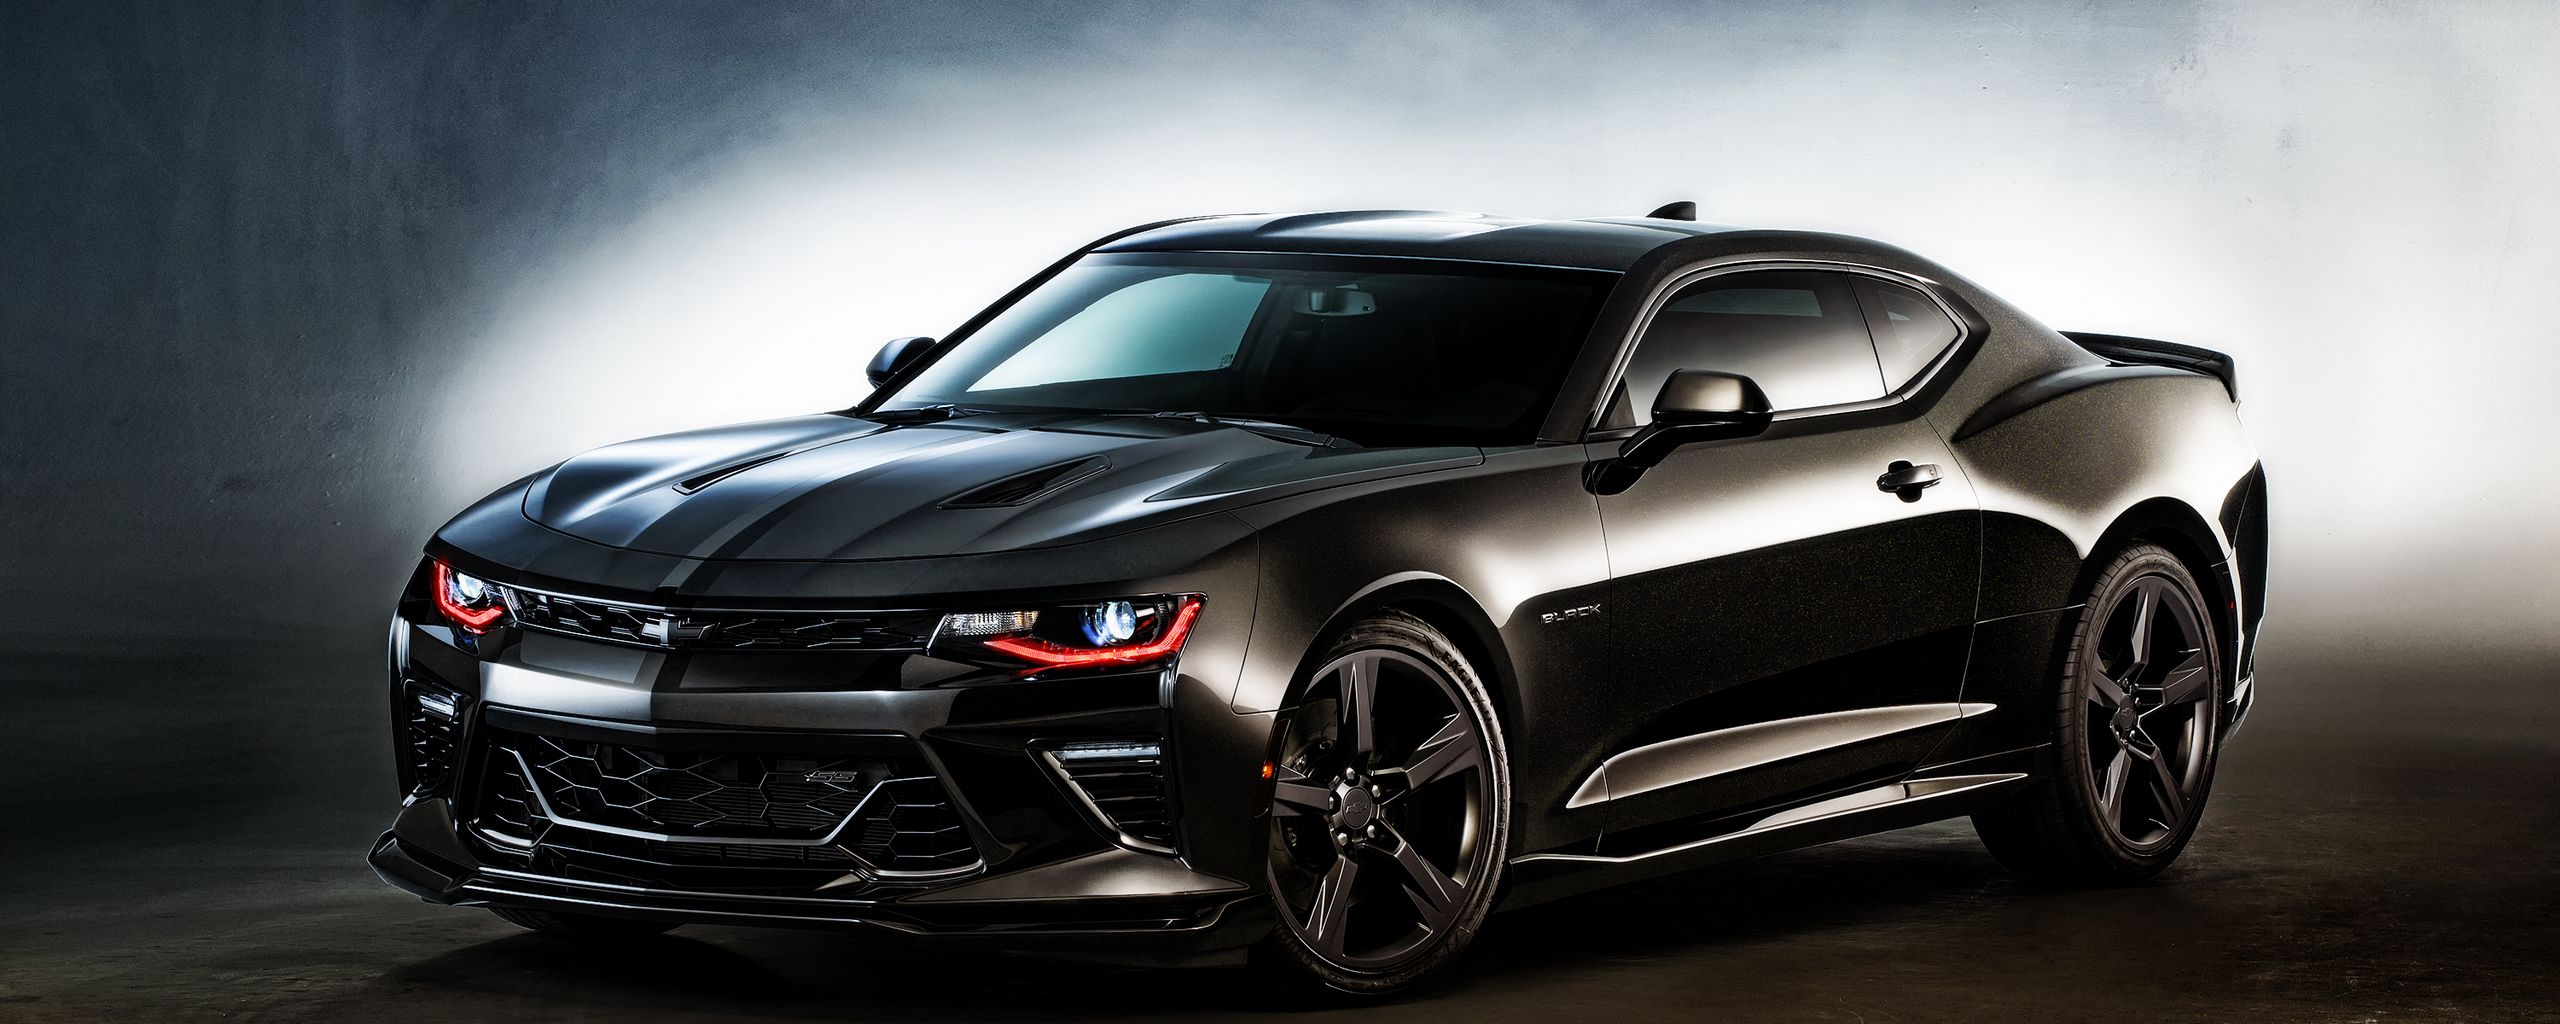 Download wallpaper 2560x1024 chevrolet, camaro, concept, black, side view  ultrawide monitor hd background